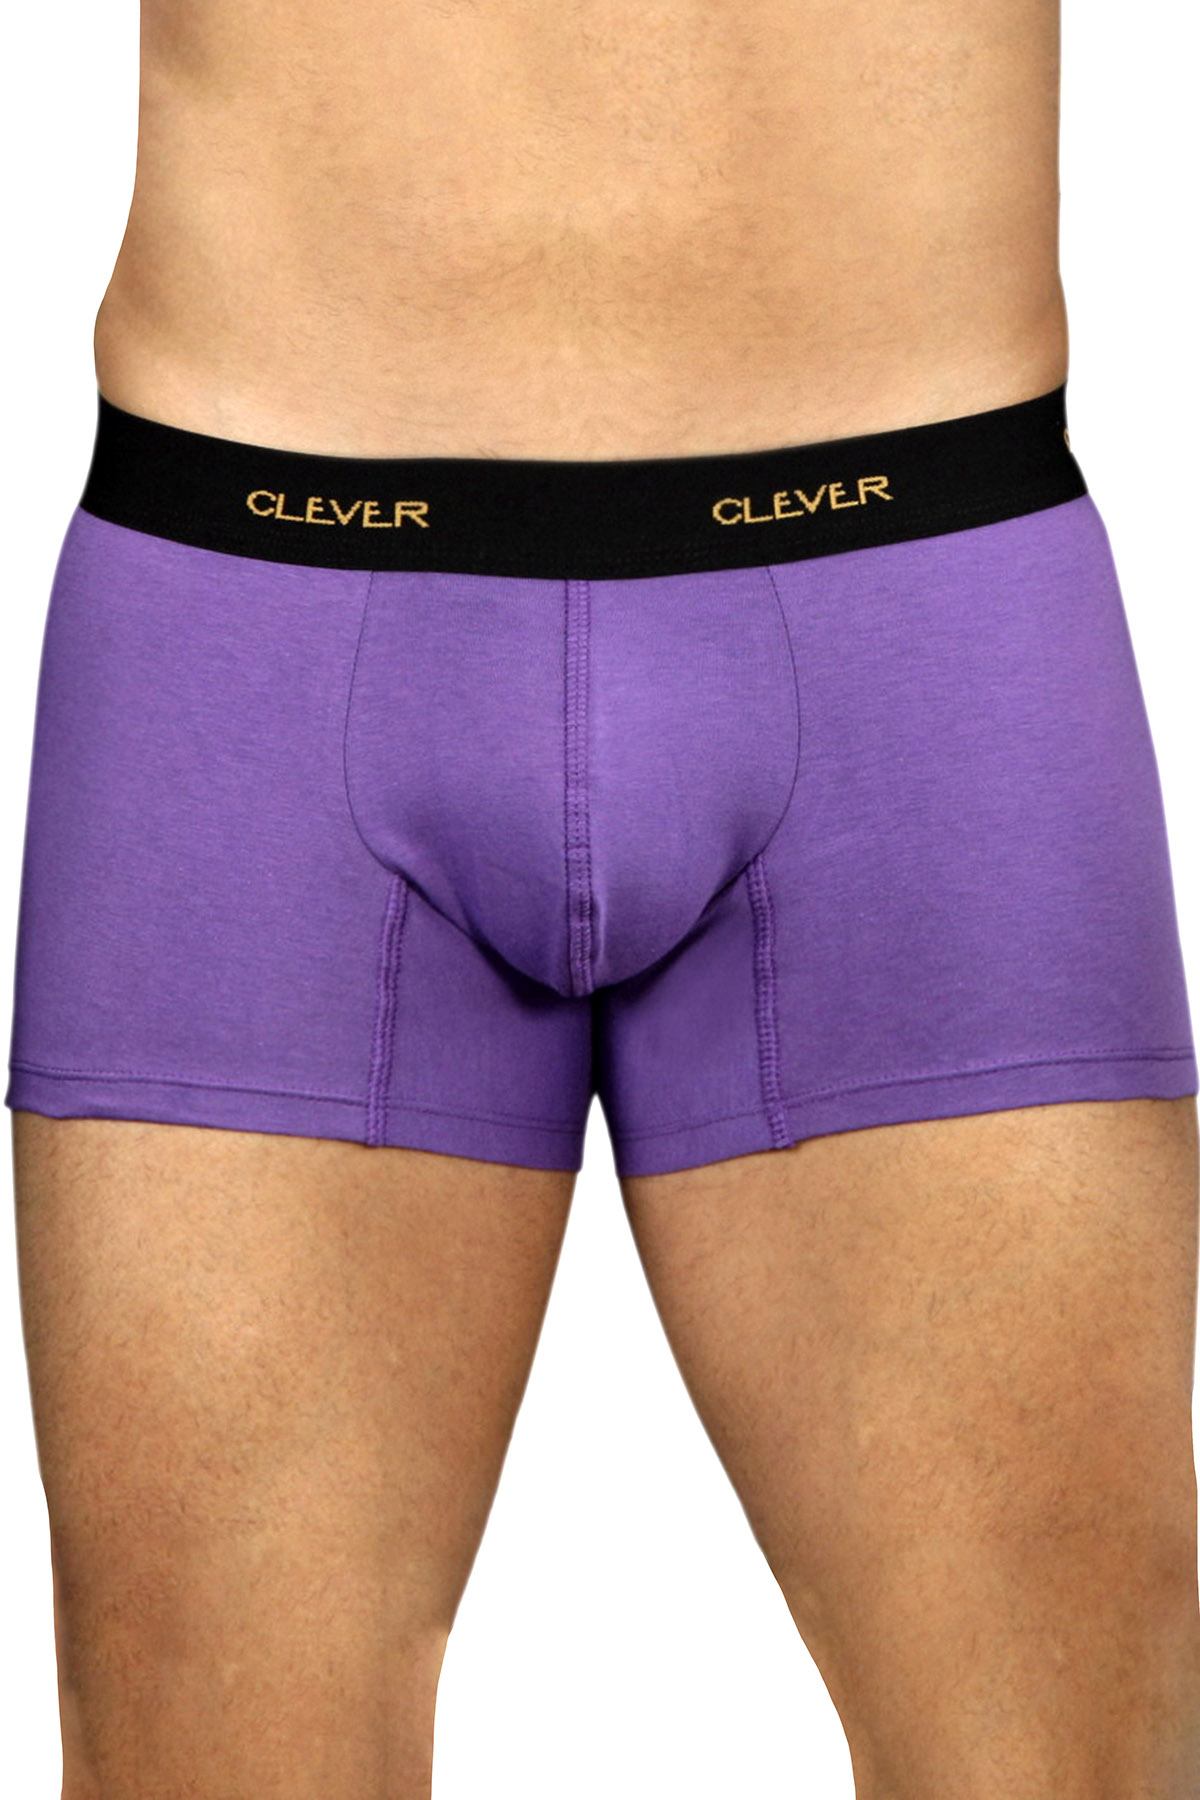 Clever Grape Limited Edition Trunk